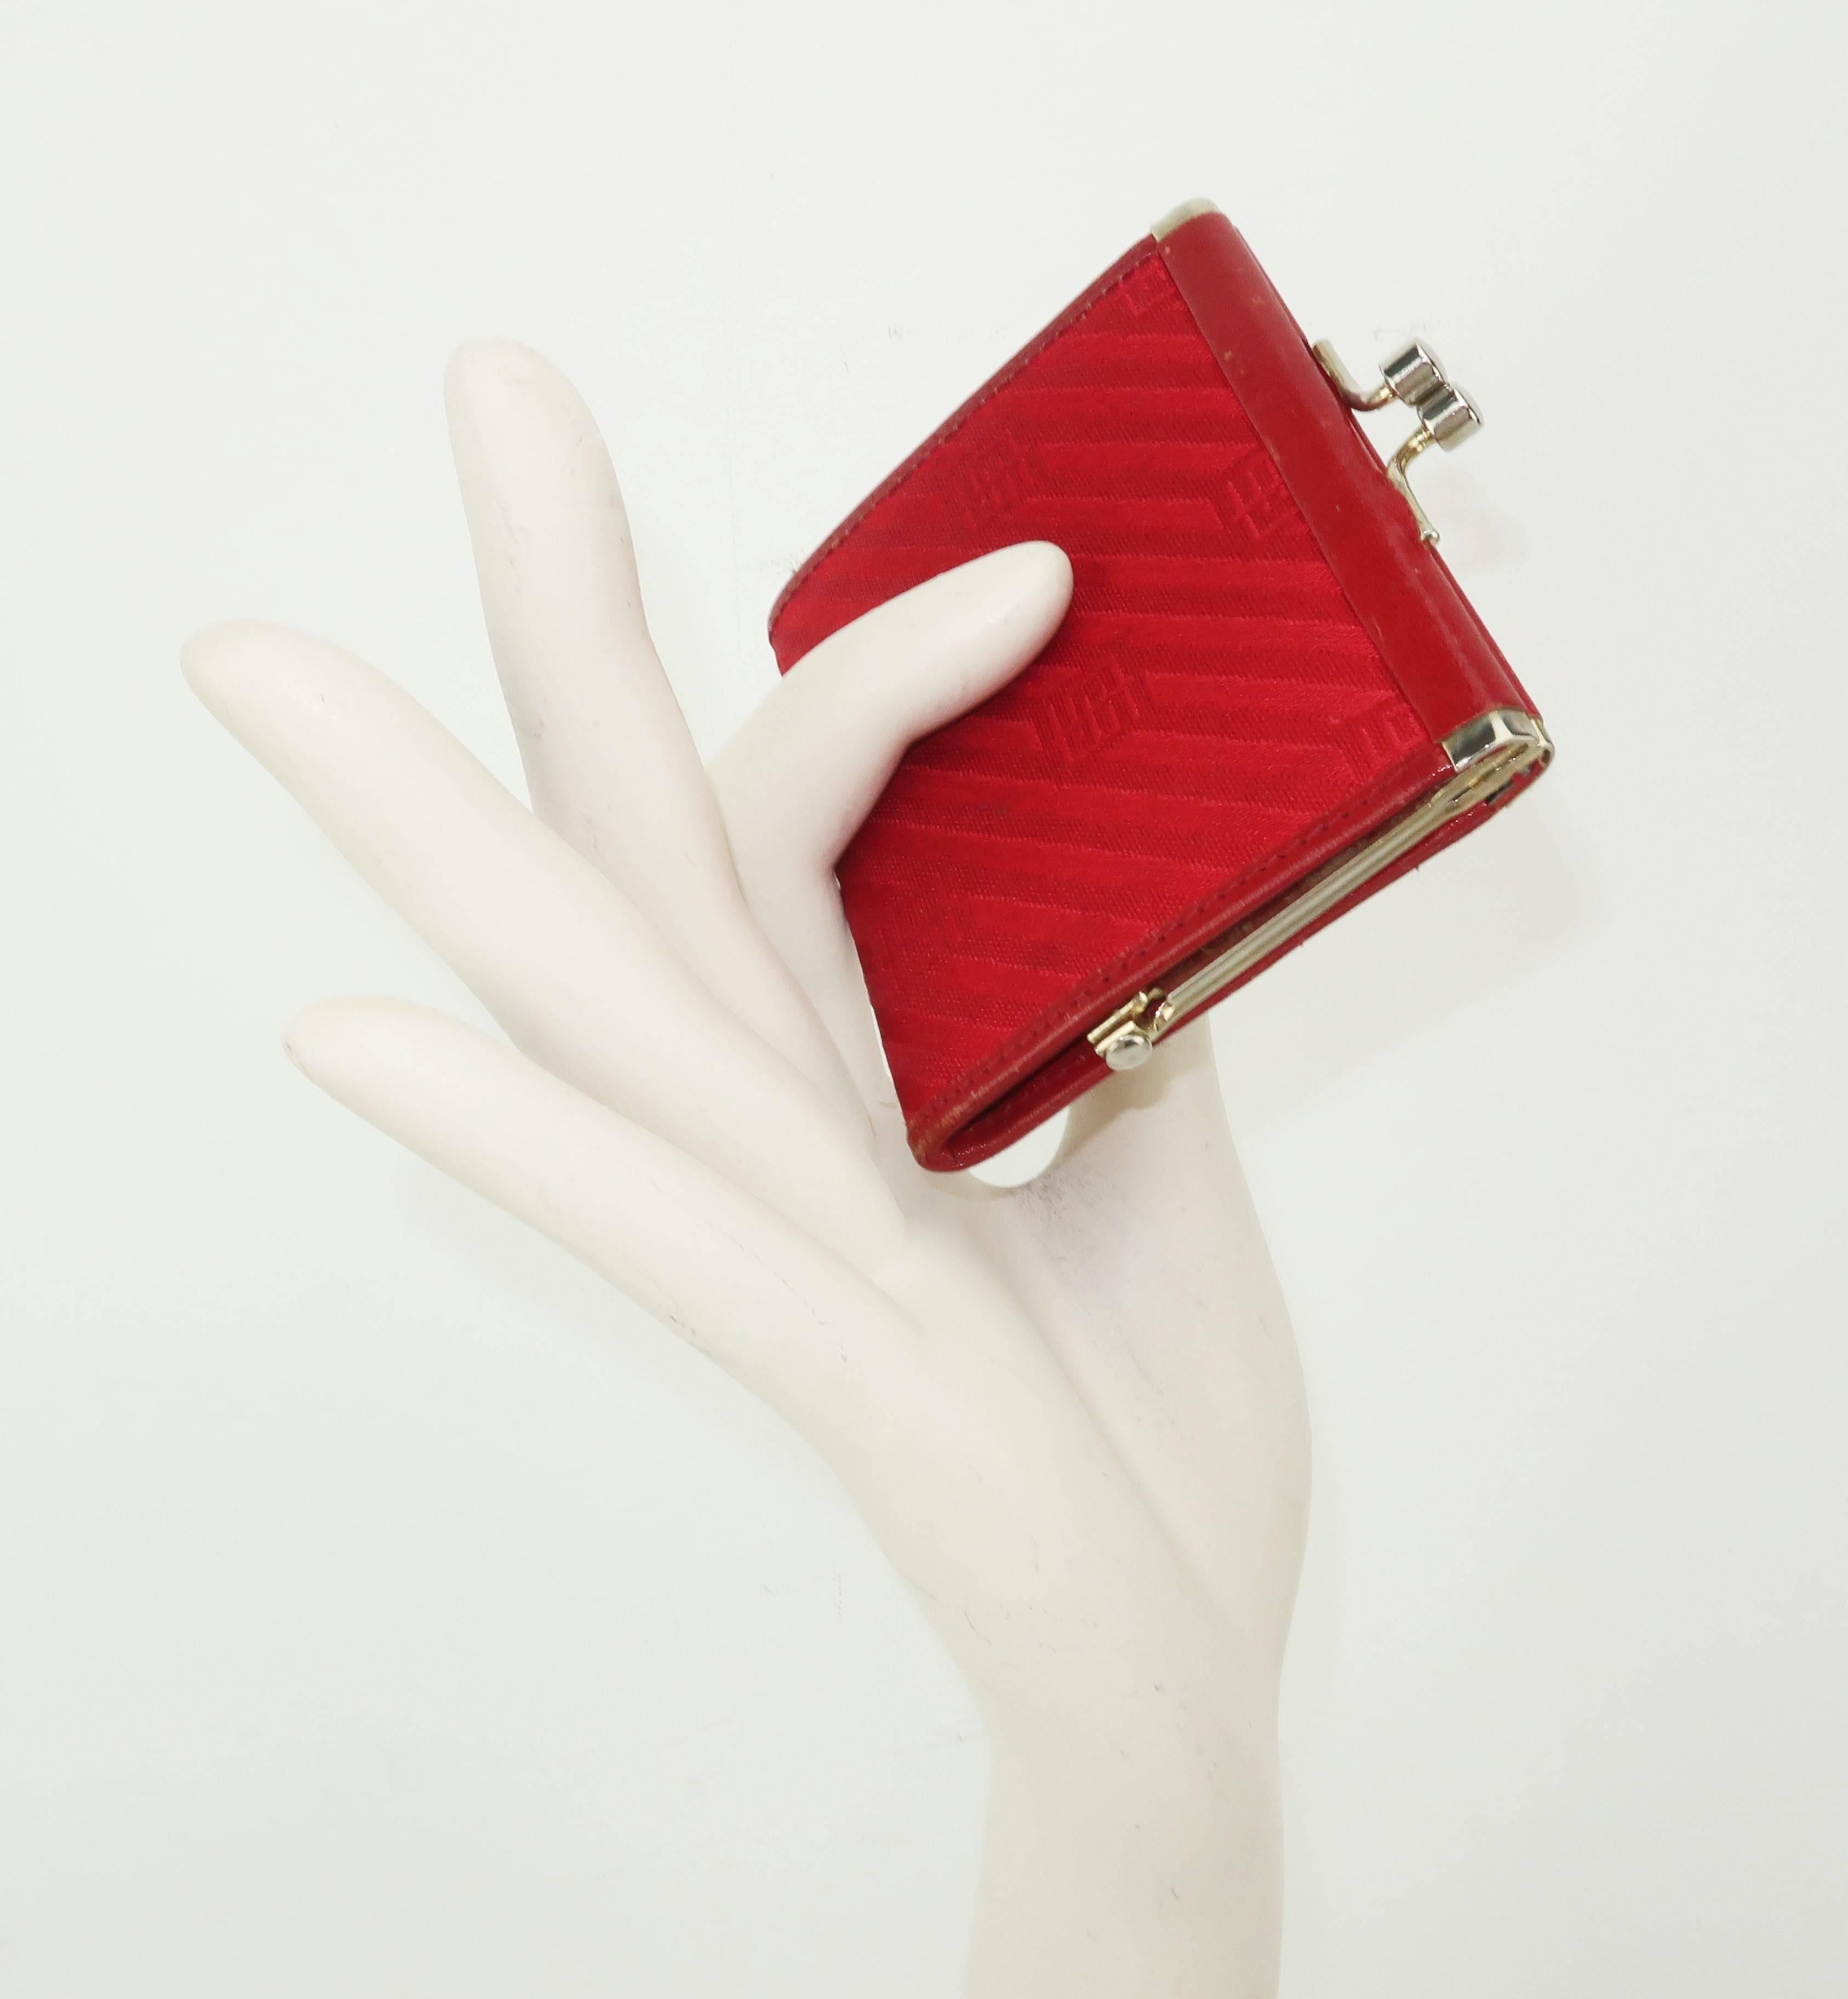 Emilio Pucci, a name synonymous with the mod prints that first hit the fashion world in the 1950's, produced this red leather edged change purse using a durable striped jacquard fabric.  The jacquard stripes are set on a diagonal with a geometric